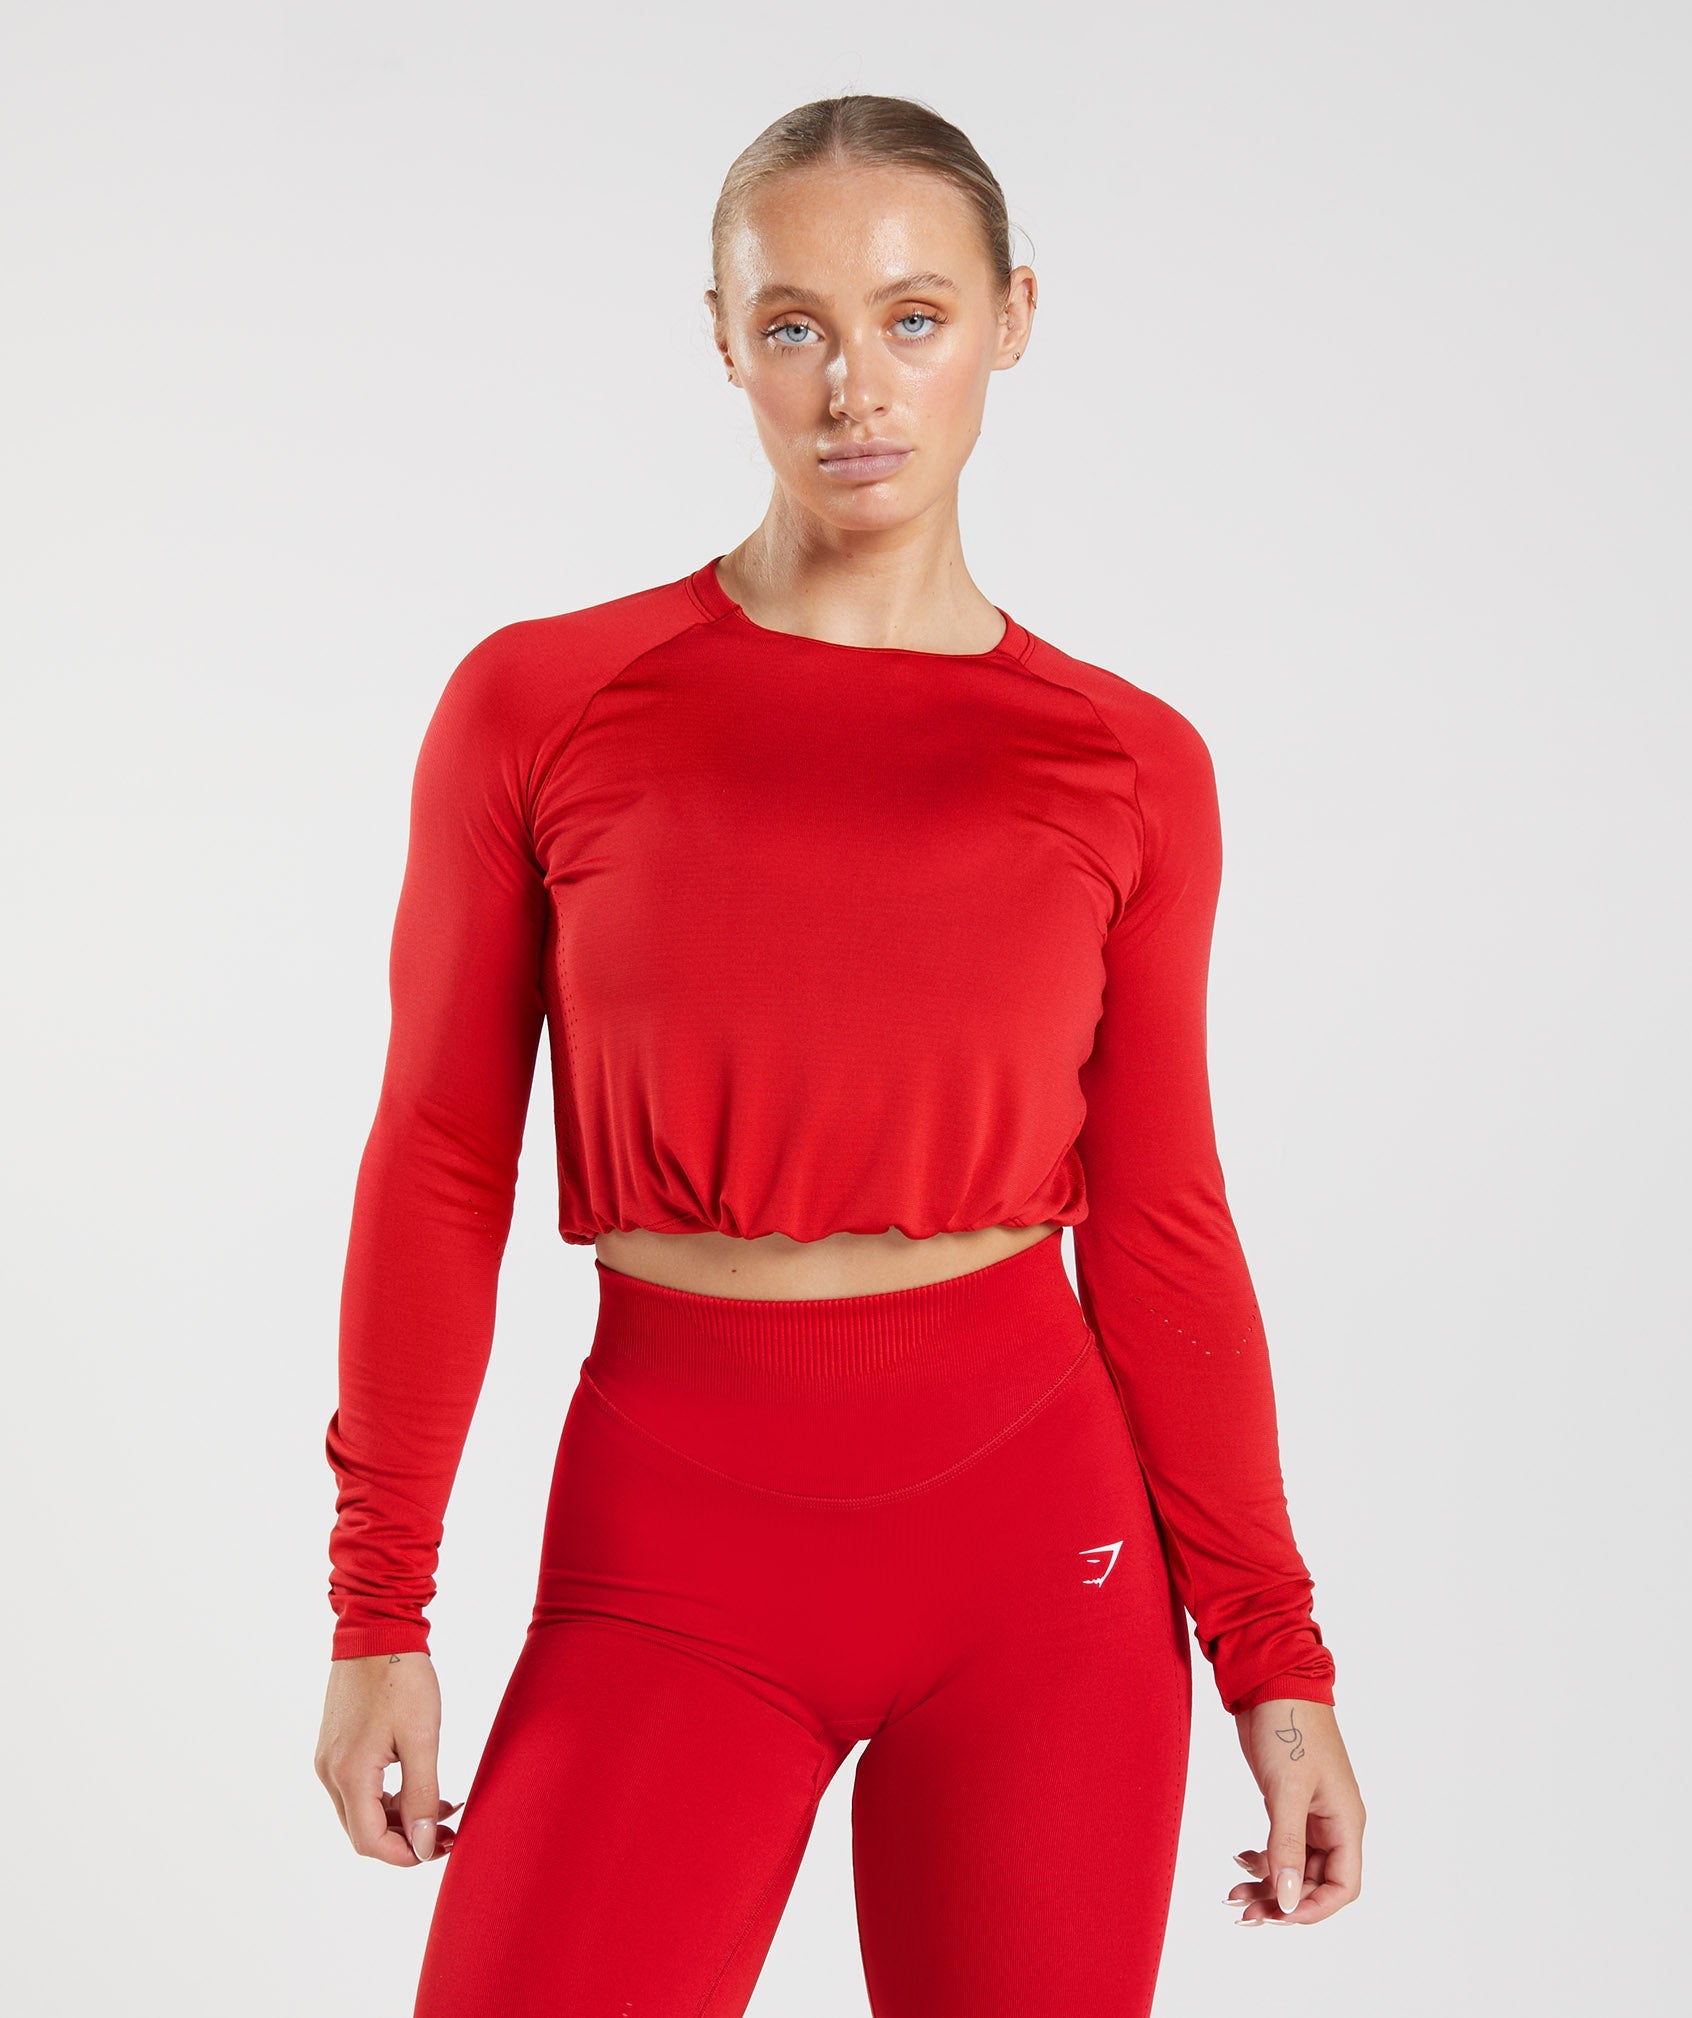 Gymshark for women • Compare & find best prices today »